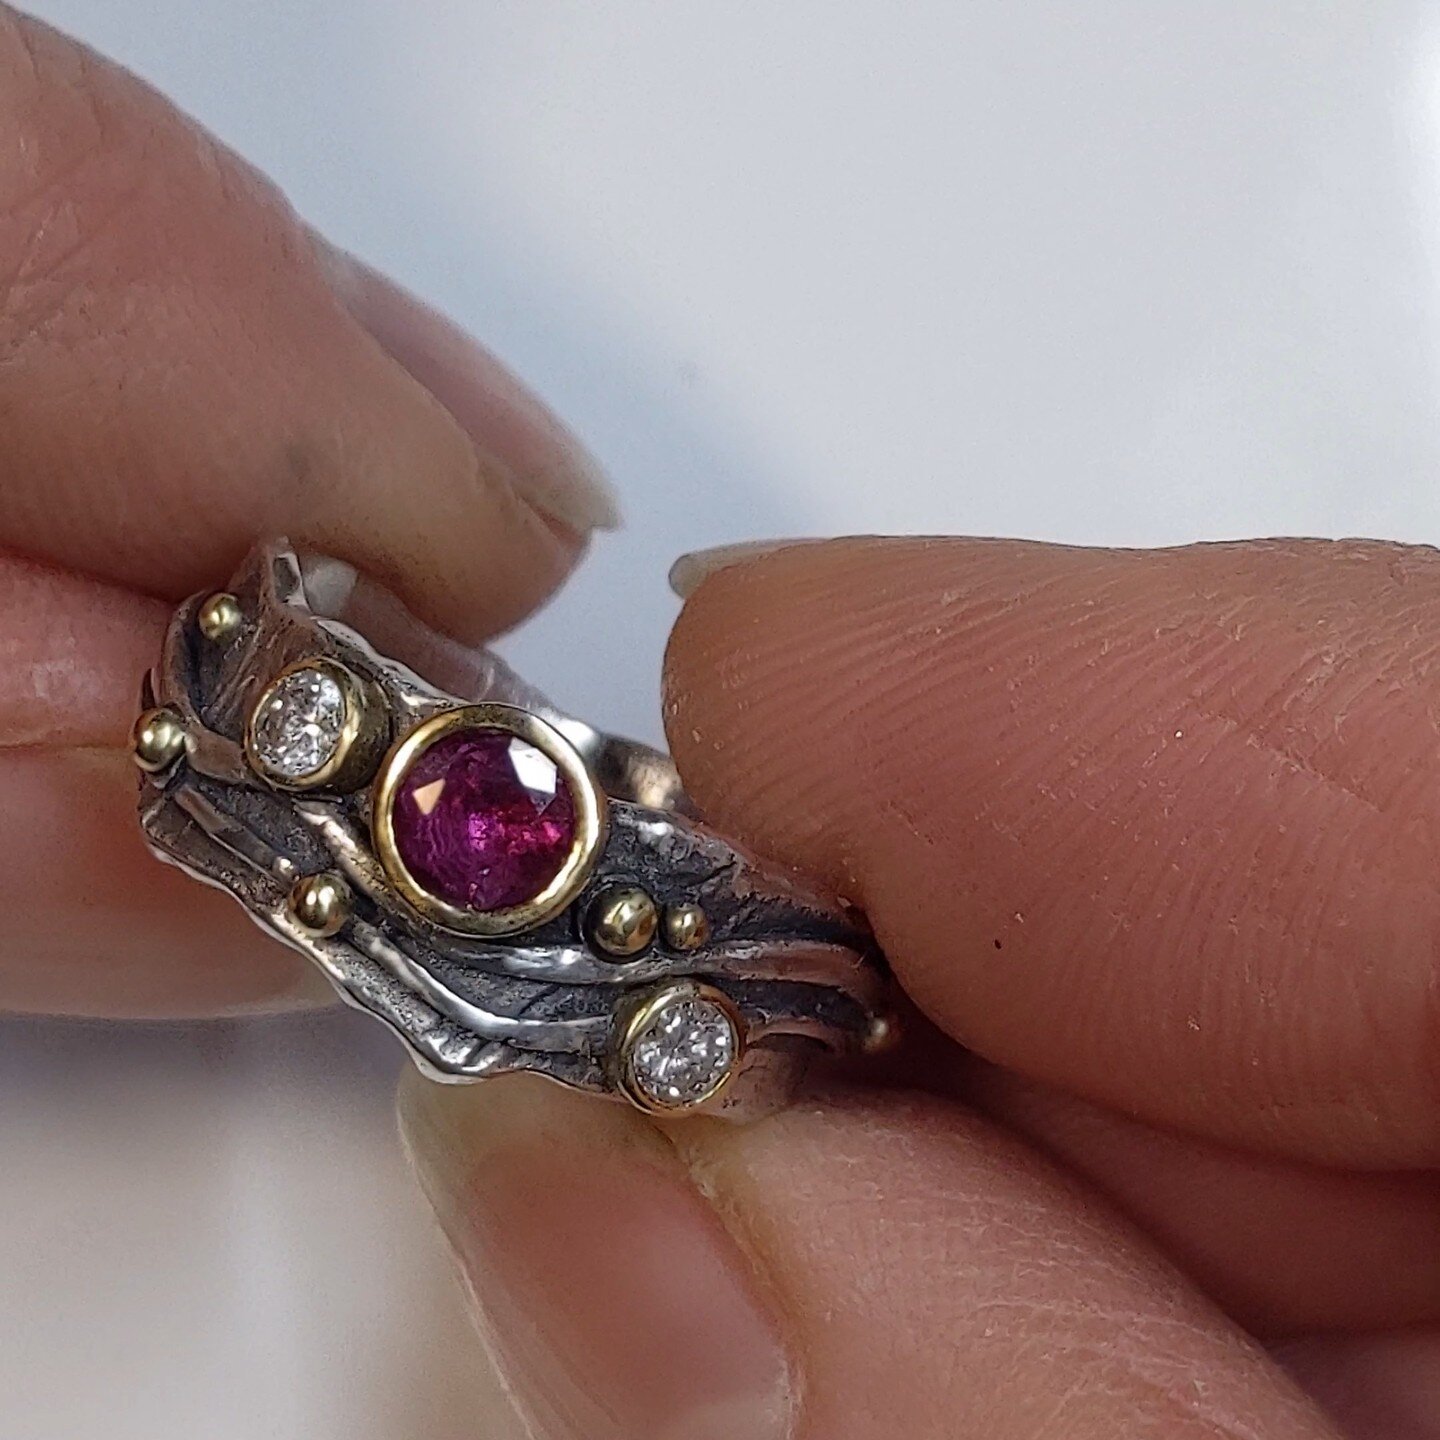 💗 Custom Made Mountain River Ring, now with a Very Happy customer!

💎 Upcycled Ruby and Diamonds from an old, heirloom ring.

#GemstoneJewellery
#HandmadeJewellery
#CustomMadeJewellery
#CustomisableRings
#RubyRing
#DiamondRing